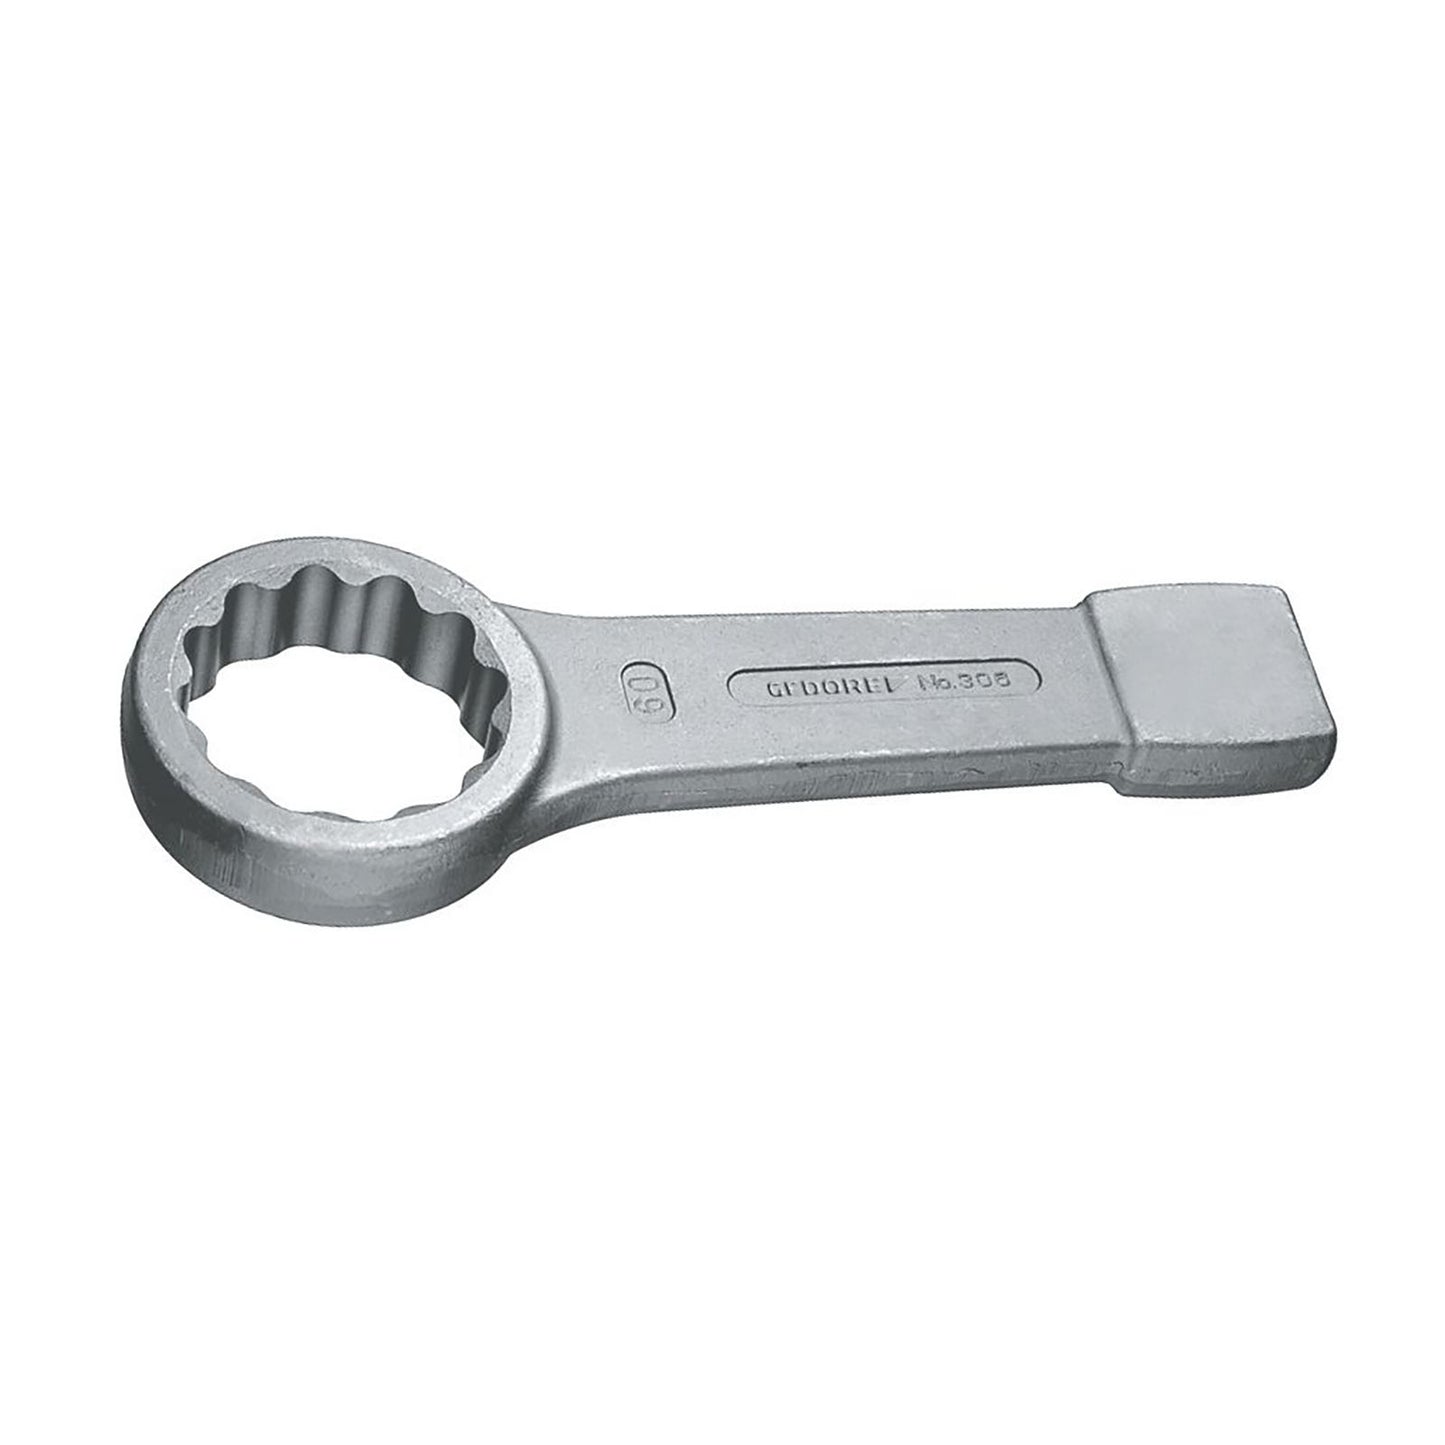 GEDORE 306 95 - Closed Strike Wrench, 95mm (6476750)